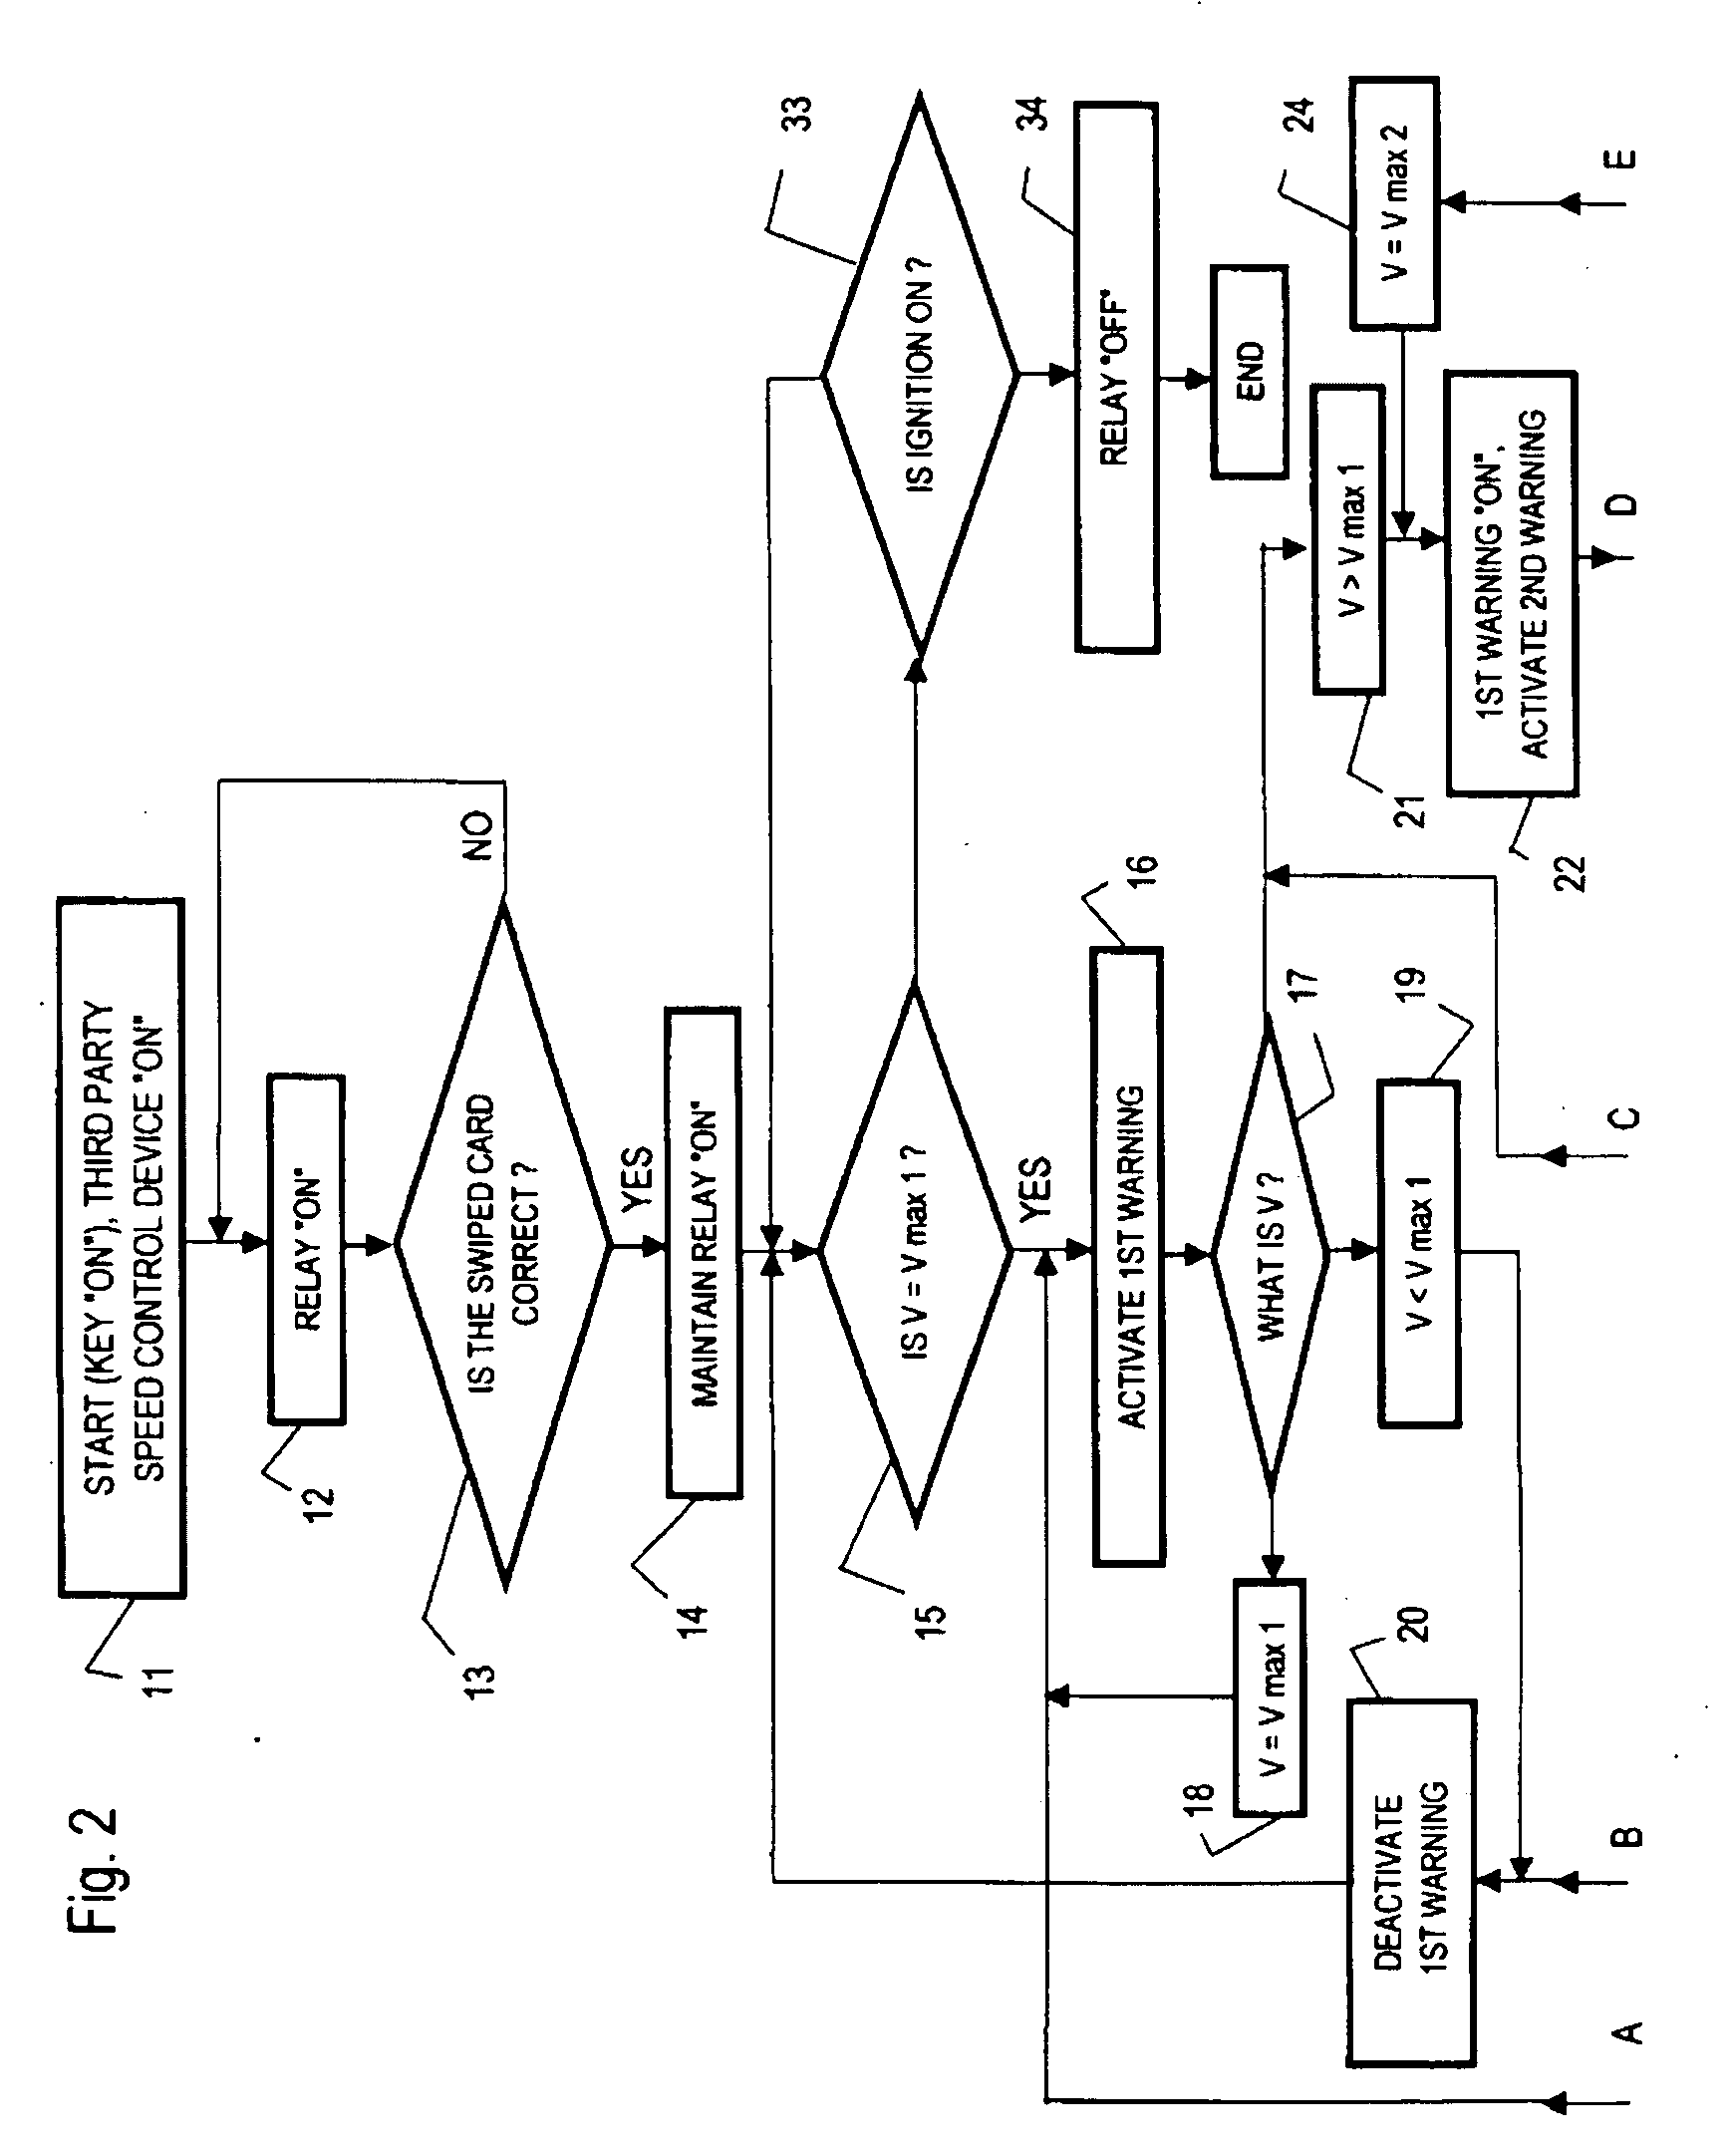 Third Party Speed Control Device